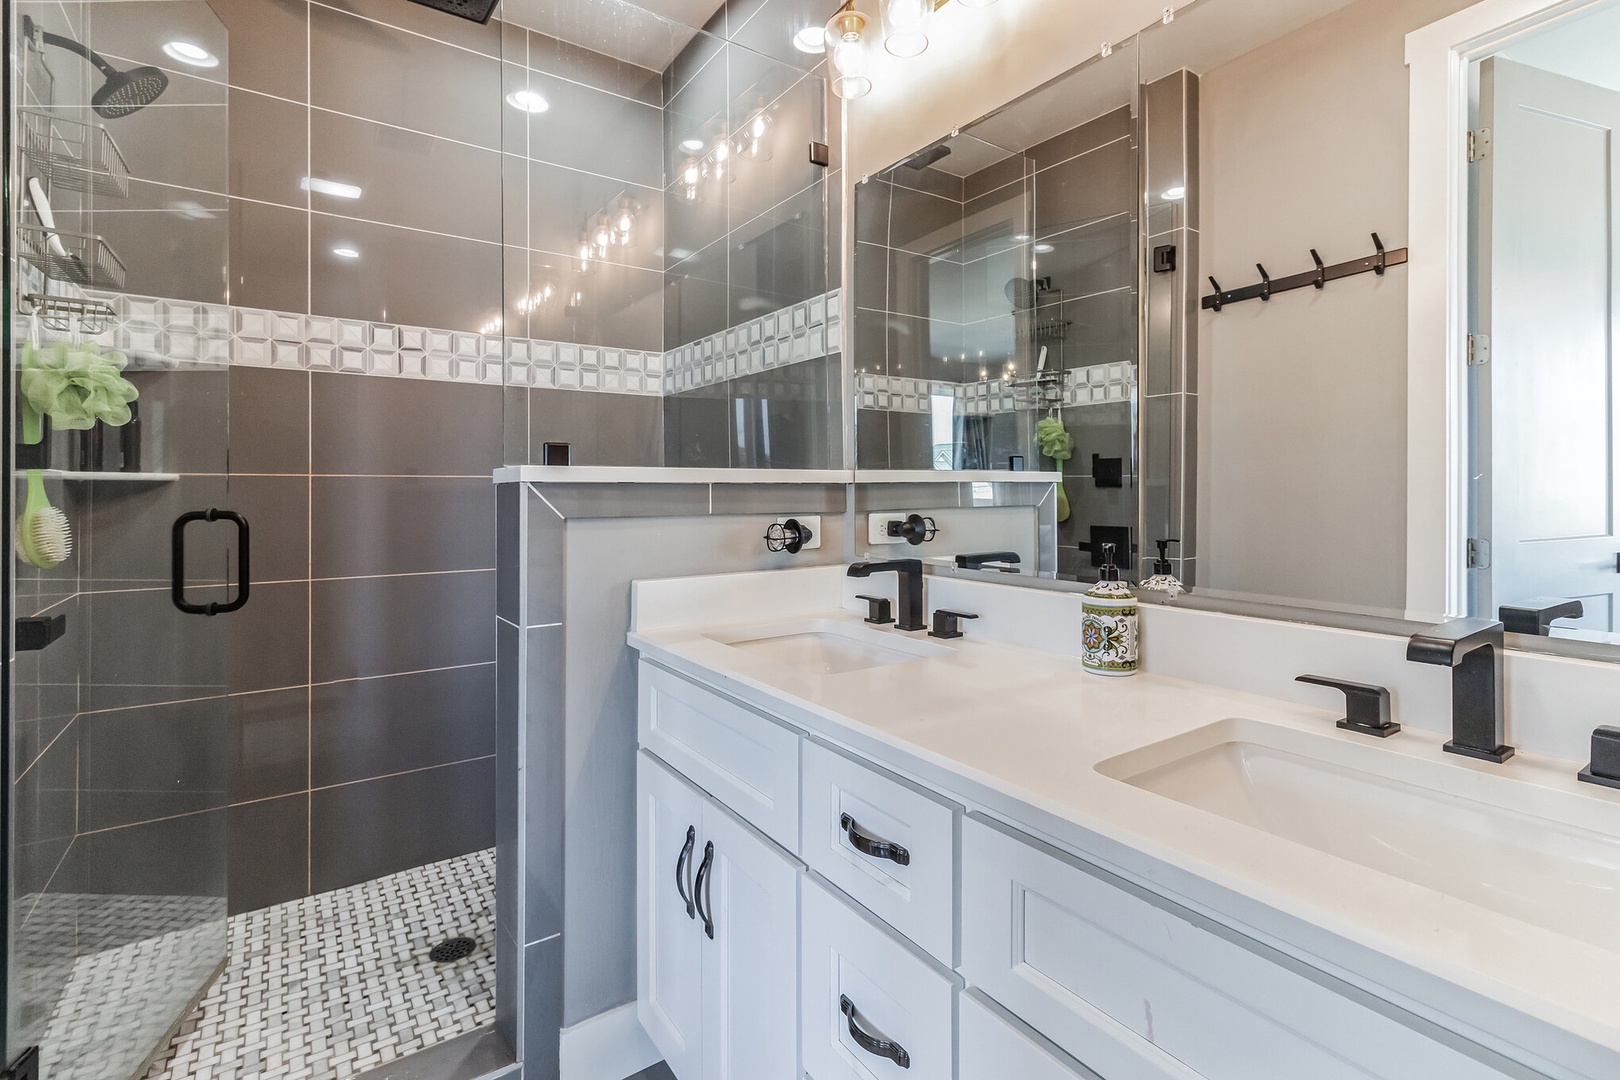 This ensuite bathroom includes dual vanities & a spa-like glass shower